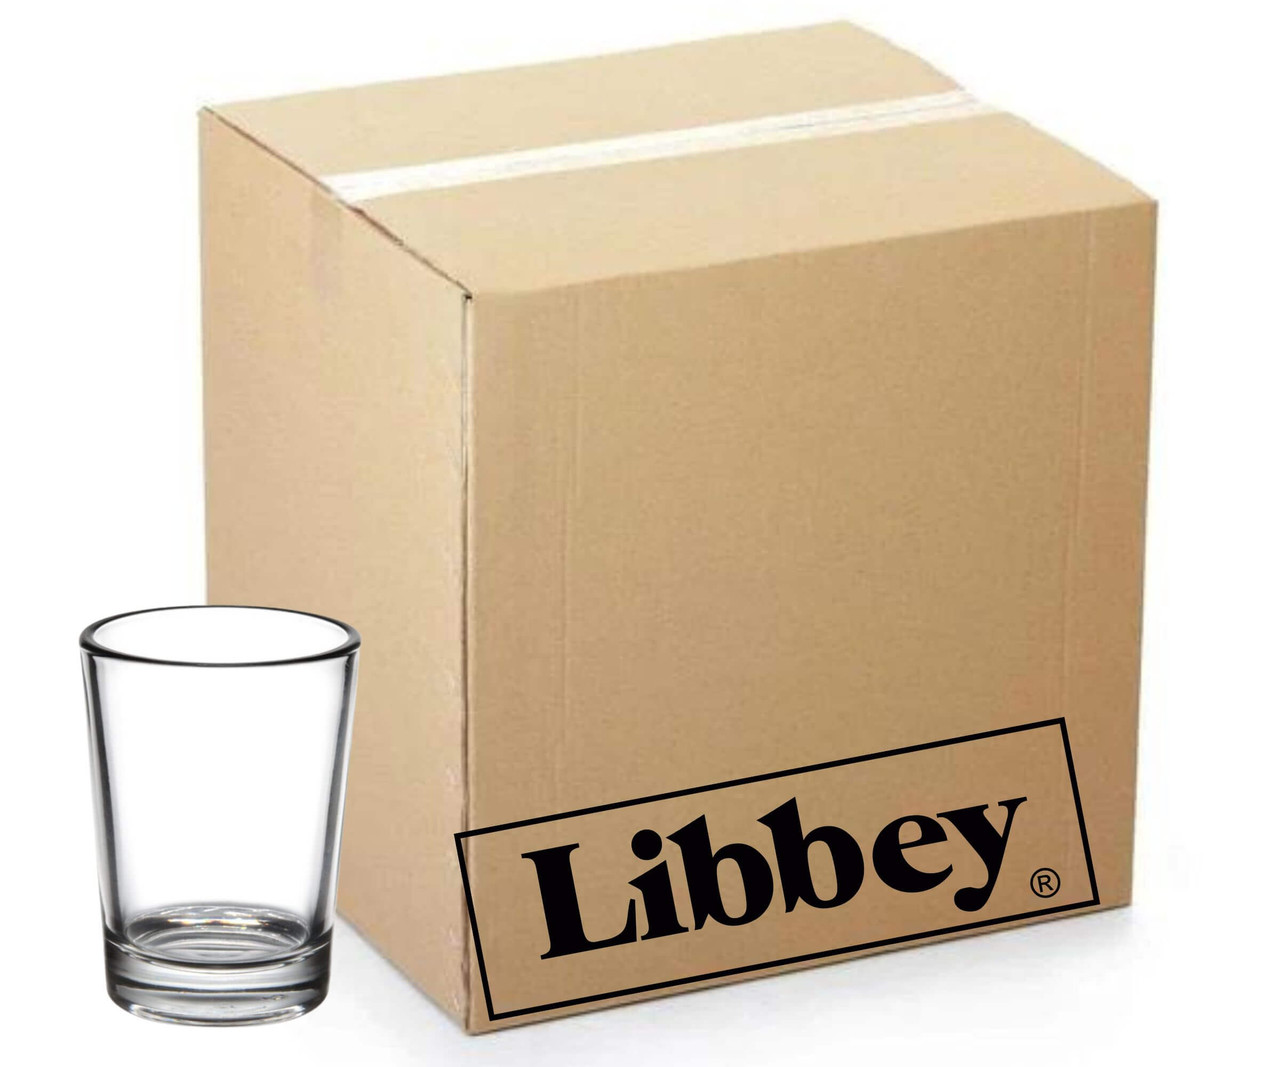 Libbey Case of 72 Side Water Glasses - 4 oz. for Bars and Catered Events-Chicken Pieces